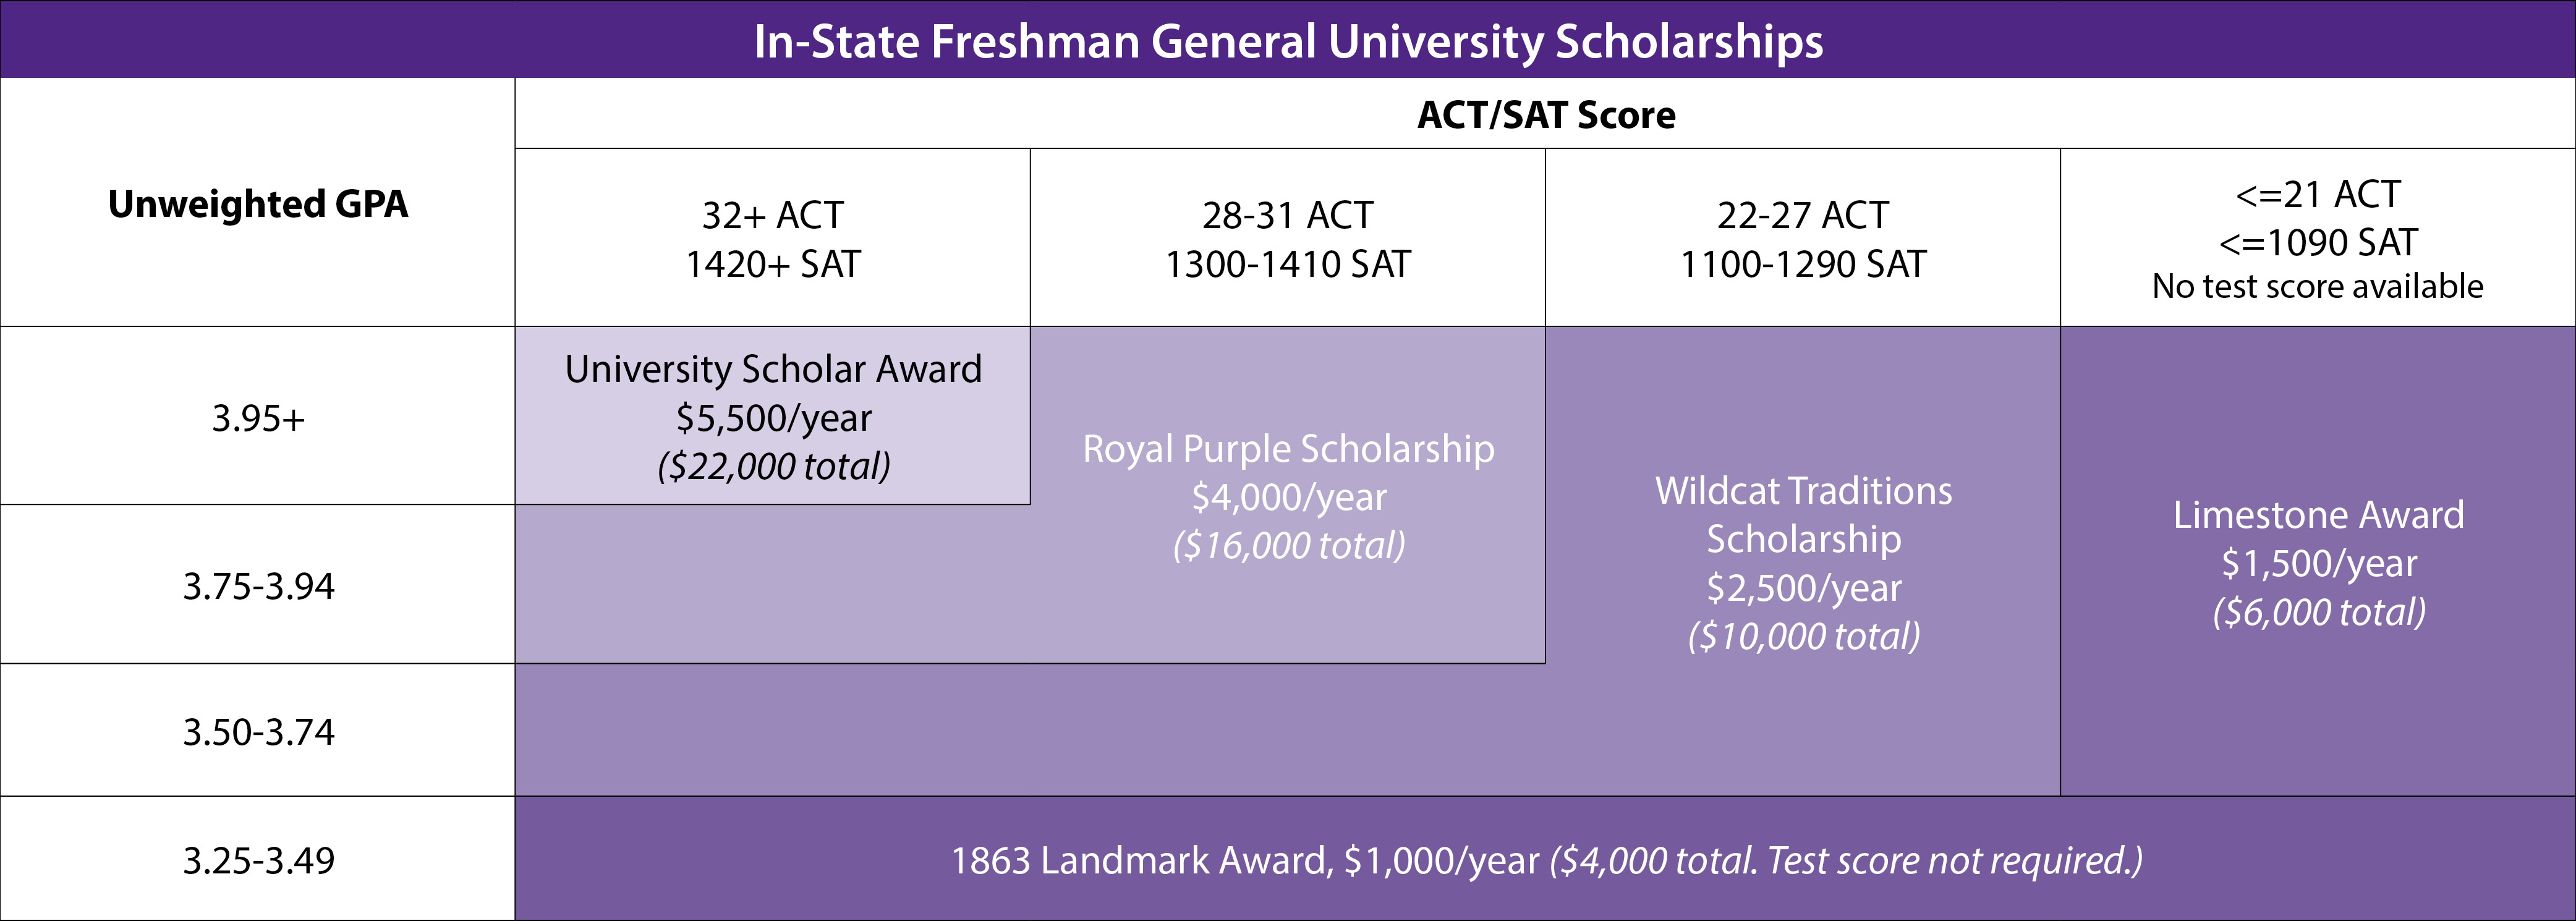 Students with a 3.25-3.49 GPA may be eligible for the 1863 Landmakr Award ($1,000 year, 4,000 total). GPA of 3.5-3.74 with an ACT of 22-27 or 1000-1290 SAT is eligible for a Wildcat Traditions Scholarship ($2,500 year $10,000 total). A GPA of 3.5-3.74 and ACT less than 21 or SAT less than 1090  or no test score available may be eligible for the Limestone Award ($1,500 a year, $6,000 total). The Royal Purple Scholarship is for students with a GPA of 3.75-3.94 and an ACT of 28-31 or SAT of 1300-1410. The ward gives $4,000 a year and $16,000 total. An unweighted GPA of 3.95+, a 32+ GPA or 1420+ SAT is eligible for the University Scholar Award for $5,500 a year and $22,000 total.